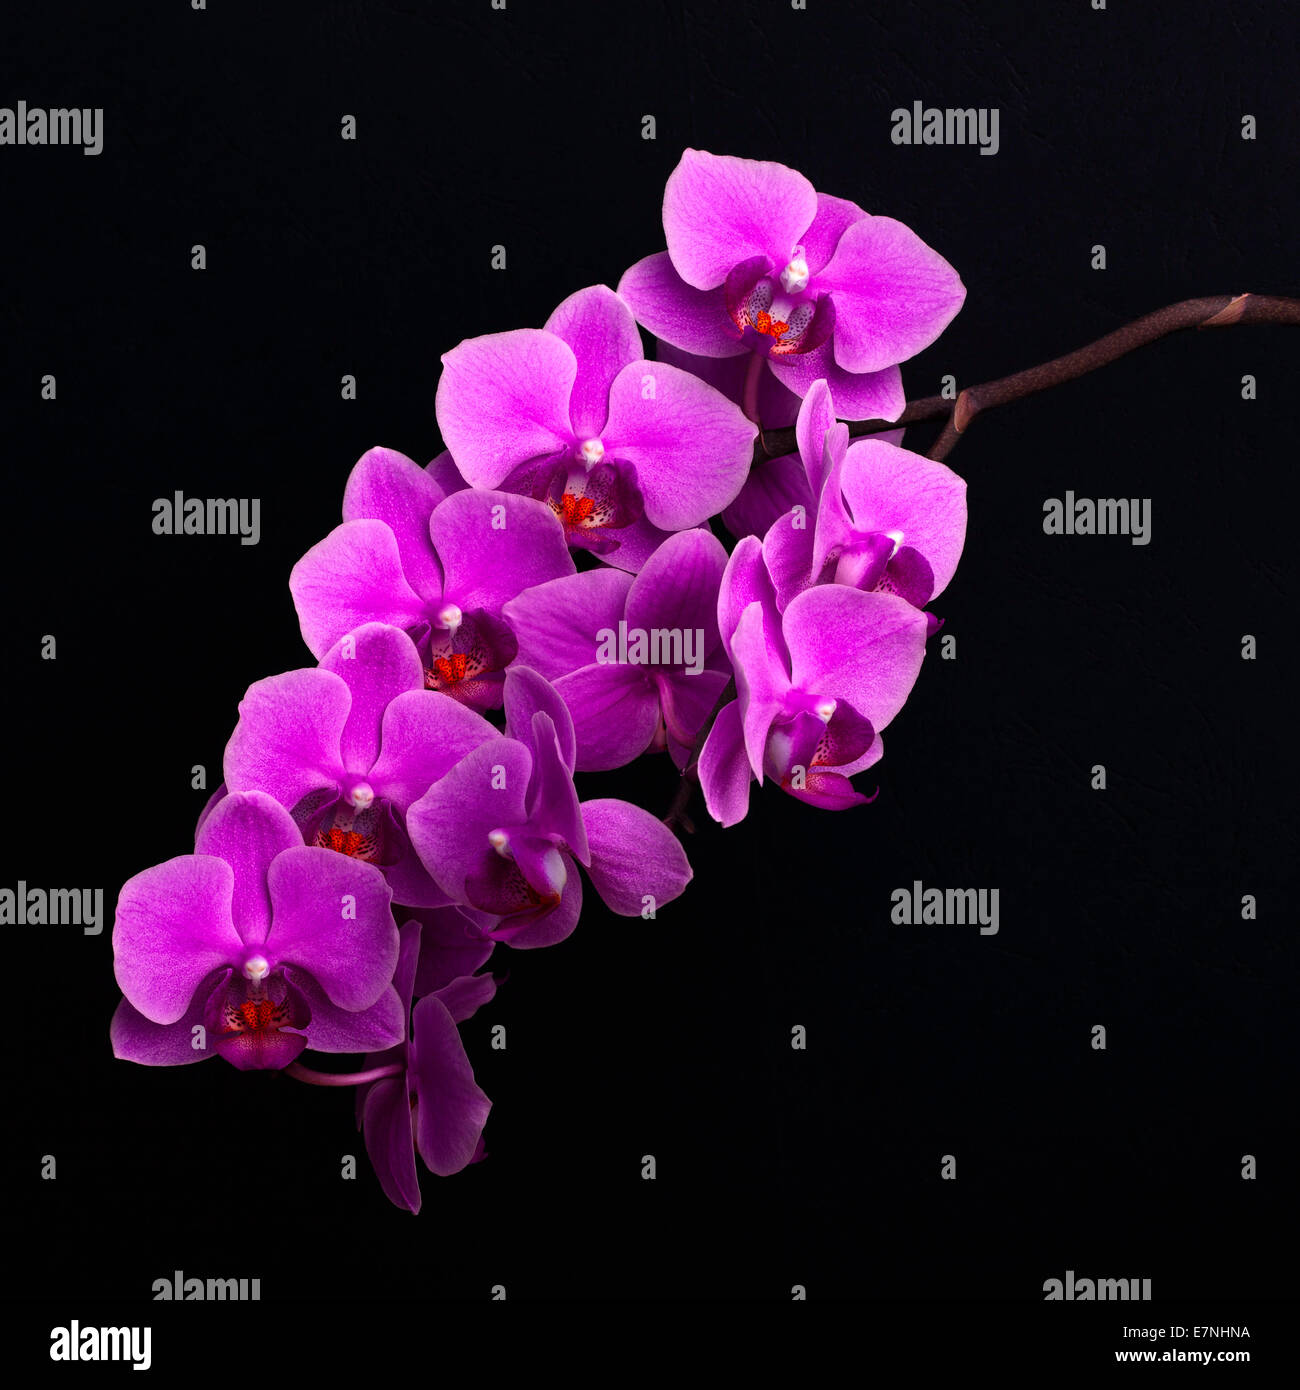 branch of magenta orchid flowers on black background Stock Photo